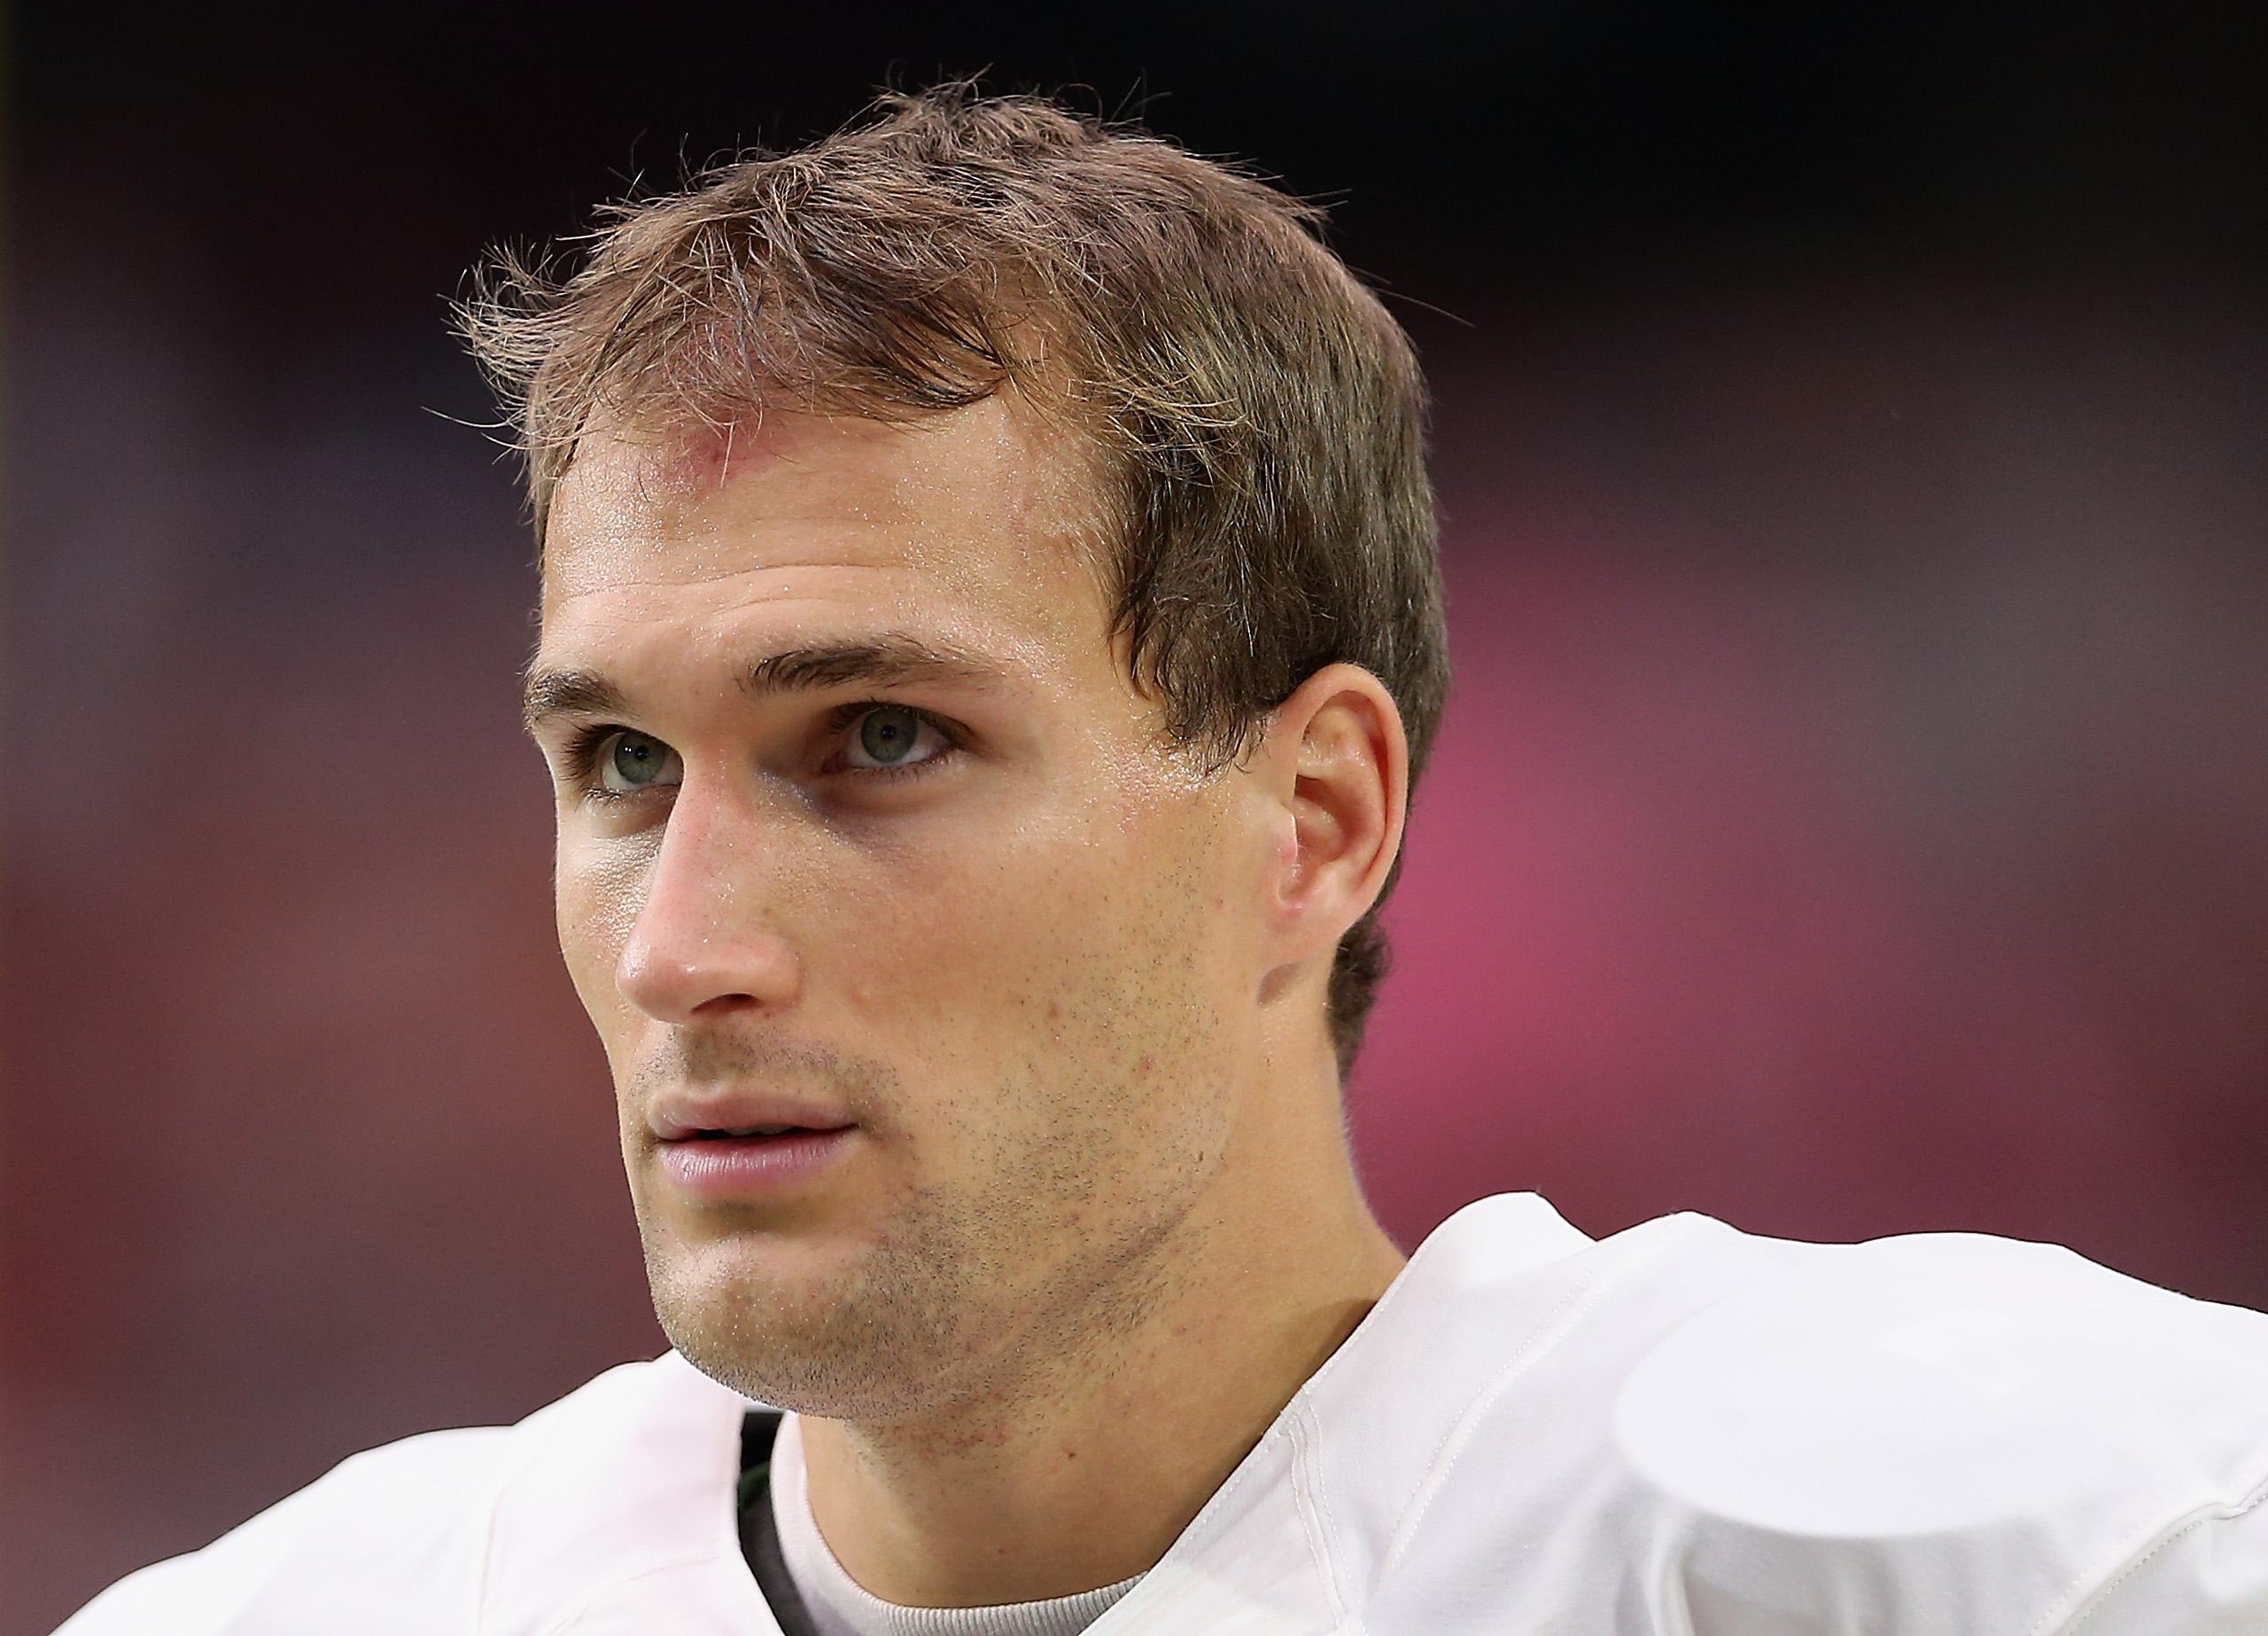 Kirk Cousins looks up at the scoreboard.